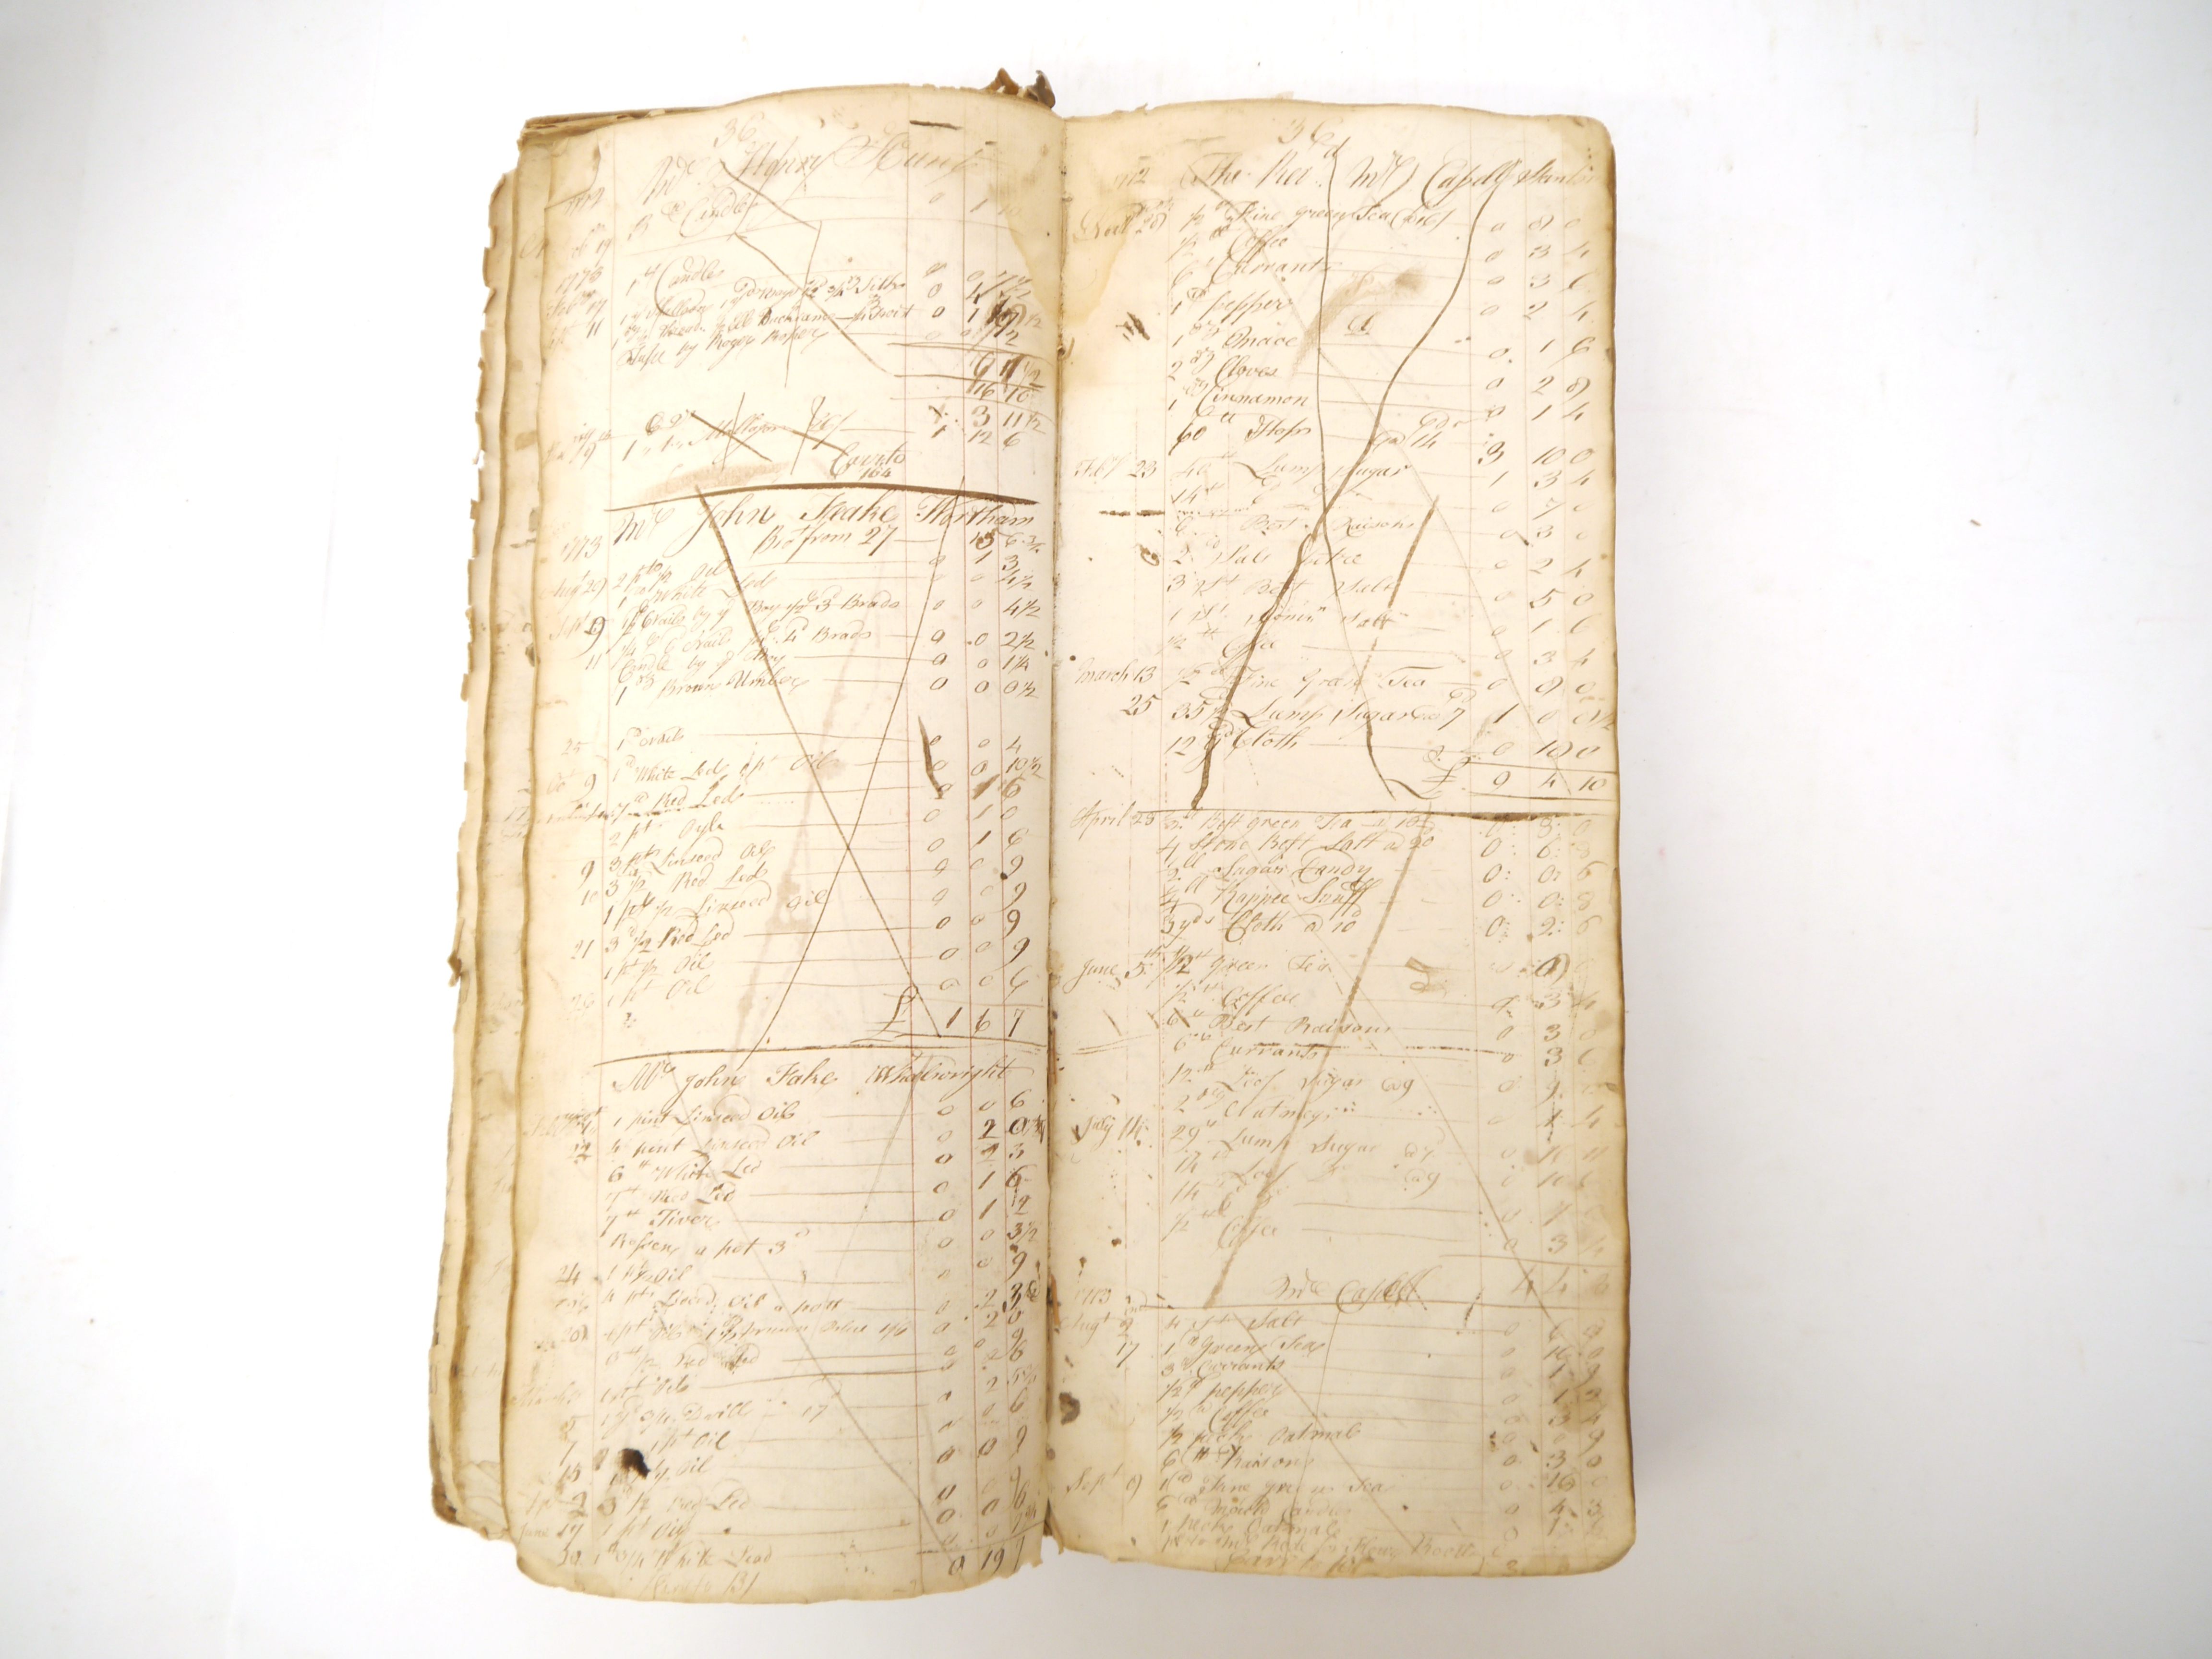 (Suffolk, Wortham.) [Ambrose Wretts.] A large manuscript account book, compiled 1772-1780 in the - Image 2 of 15